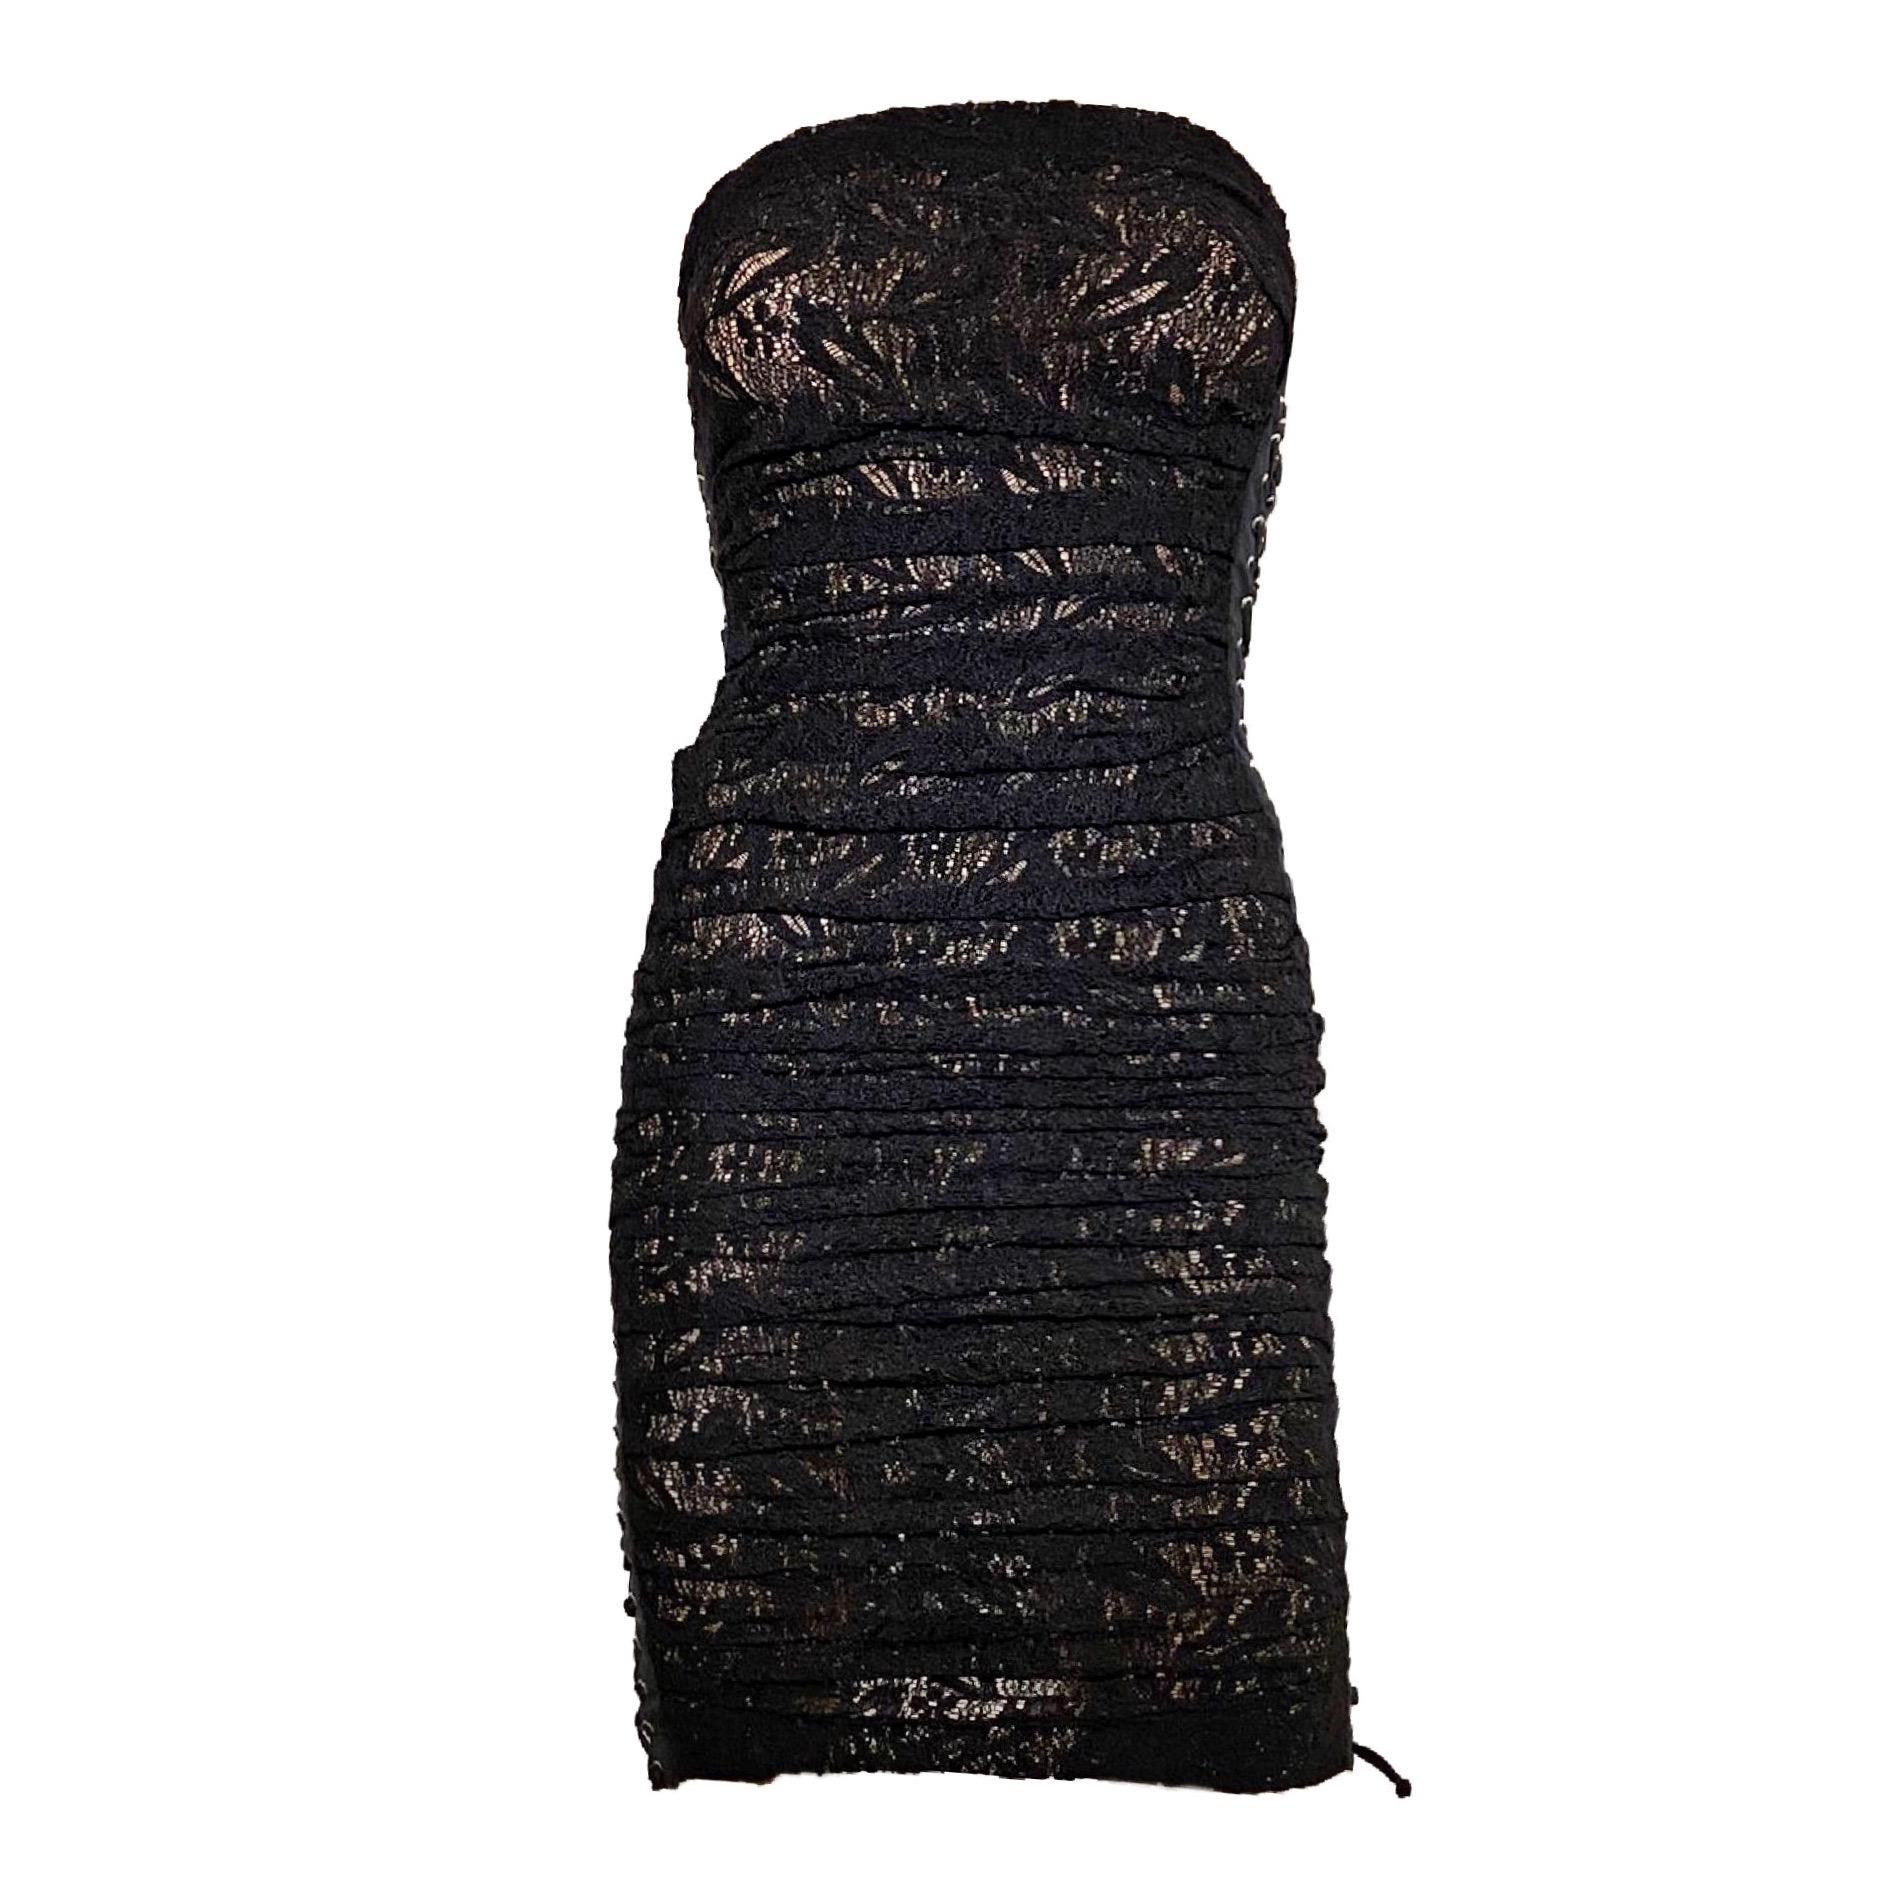 D&G by Dolce & Gabbana black lace ruched mini dress with side lace-up fastenings and back zip closure from the Spring/Summer 2007 collection. 

New with tags still attached

Size 42

Bust: 70 cm / 27.5 inch
Total length: 65 cm / 25.5 inch